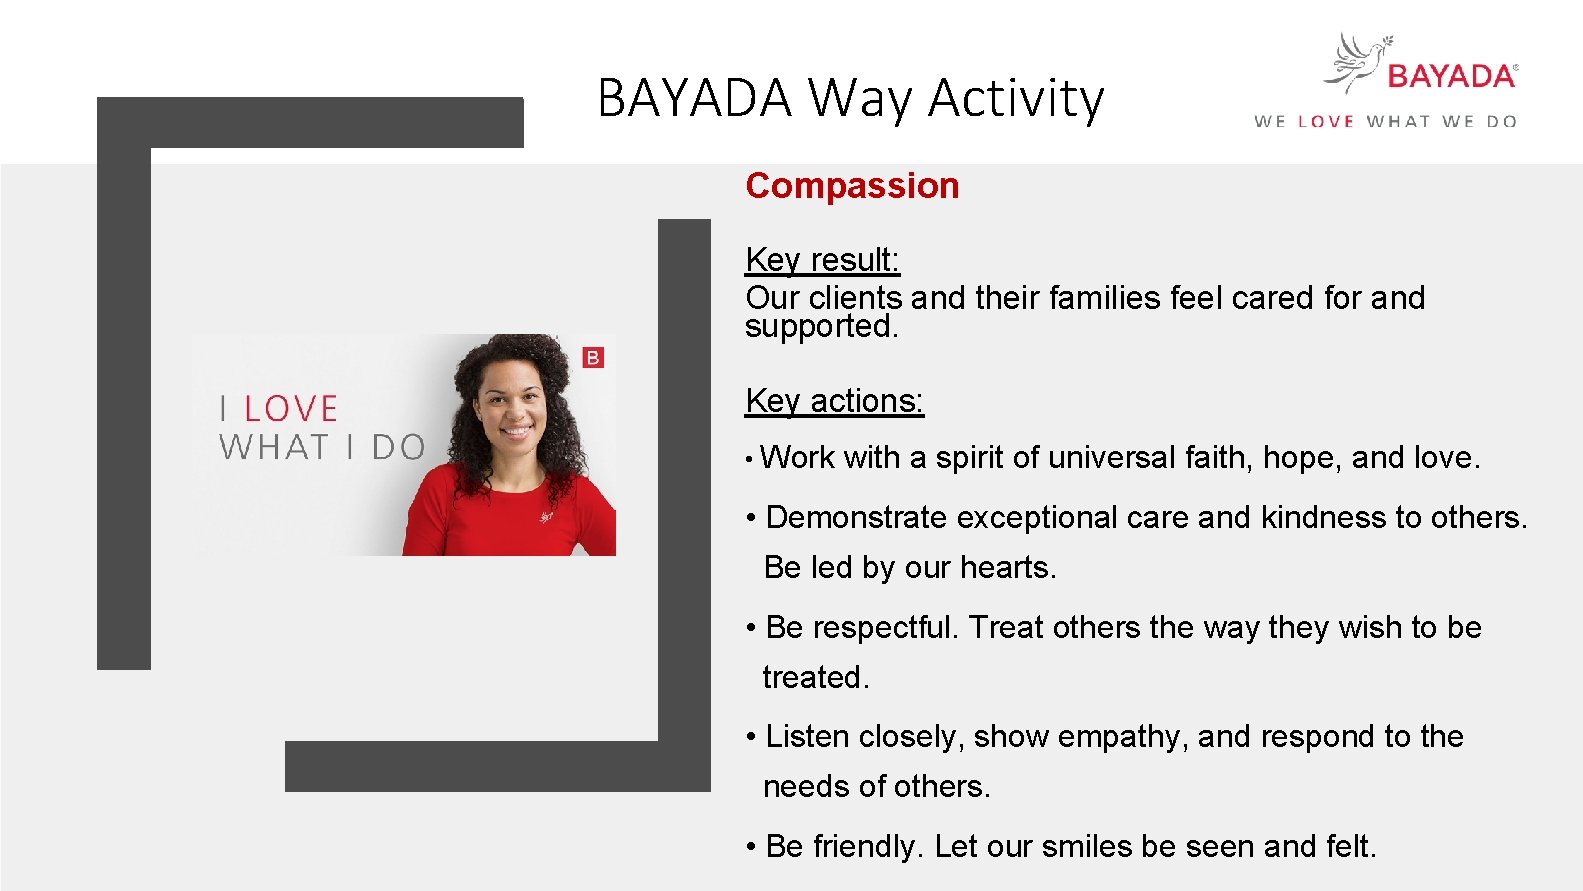 BAYADA Way Activity Compassion Key result: Our clients and their families feel cared for